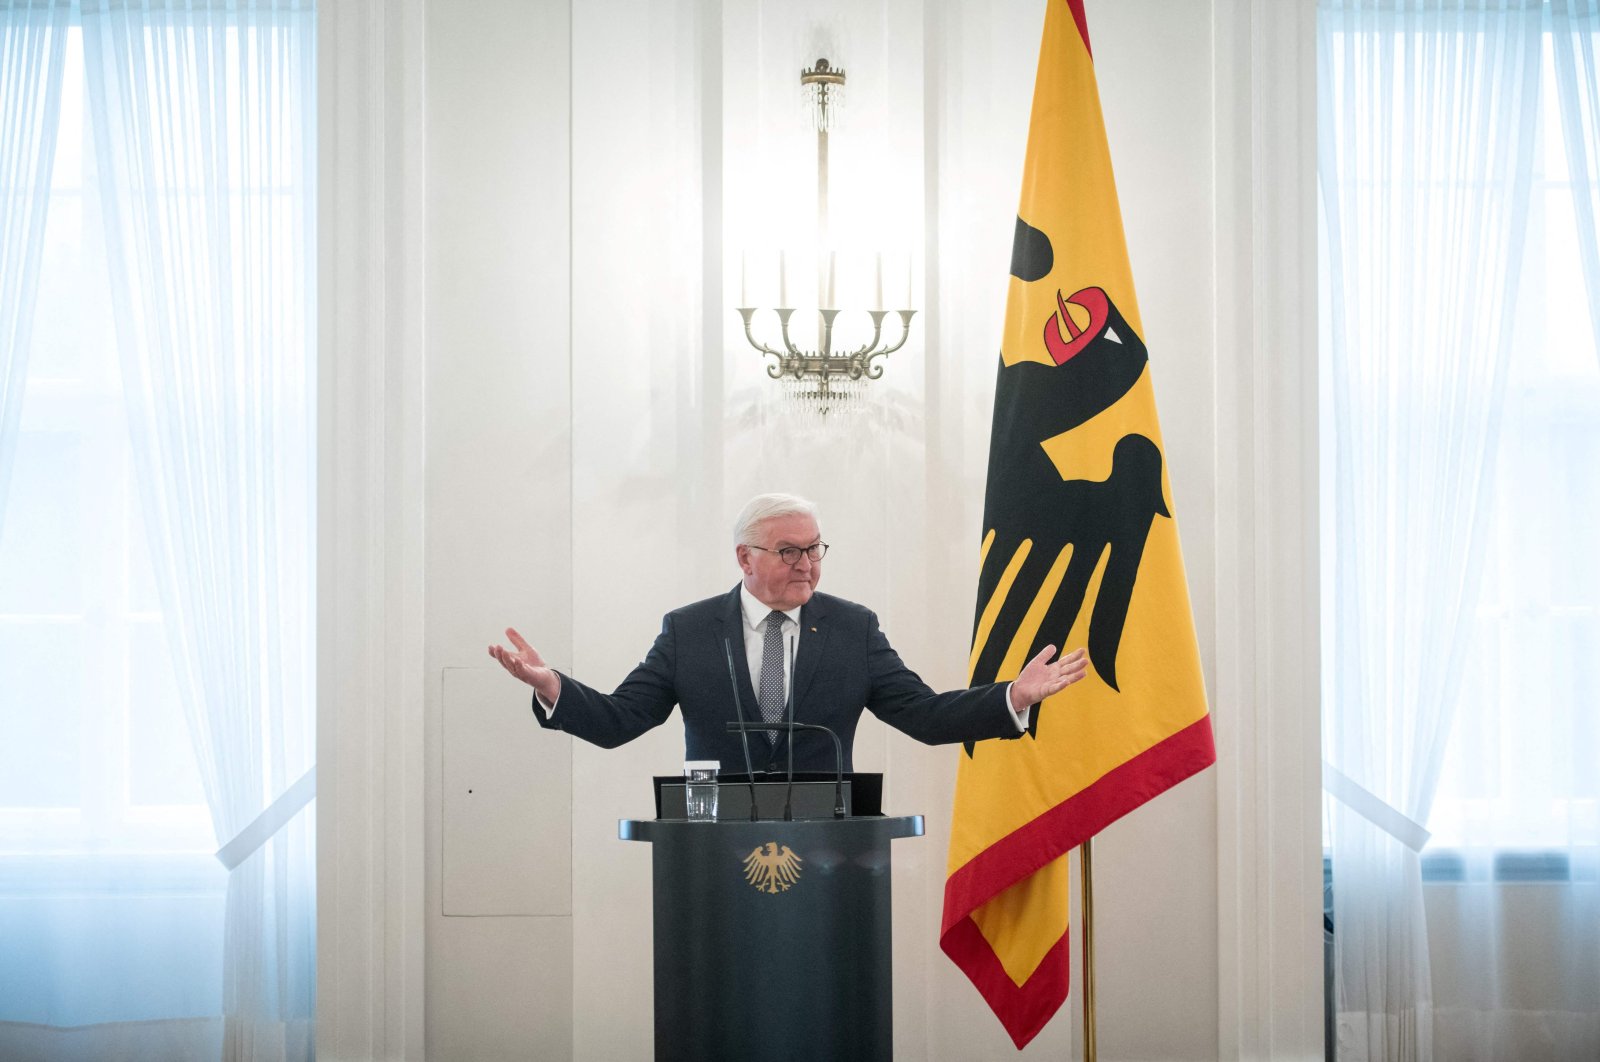 German President Frank-Walter Steinmeier addresses guests during a reception at Bellevue Palace in Berlin, Germany, Feb. 17, 2022. (AFP Photo)